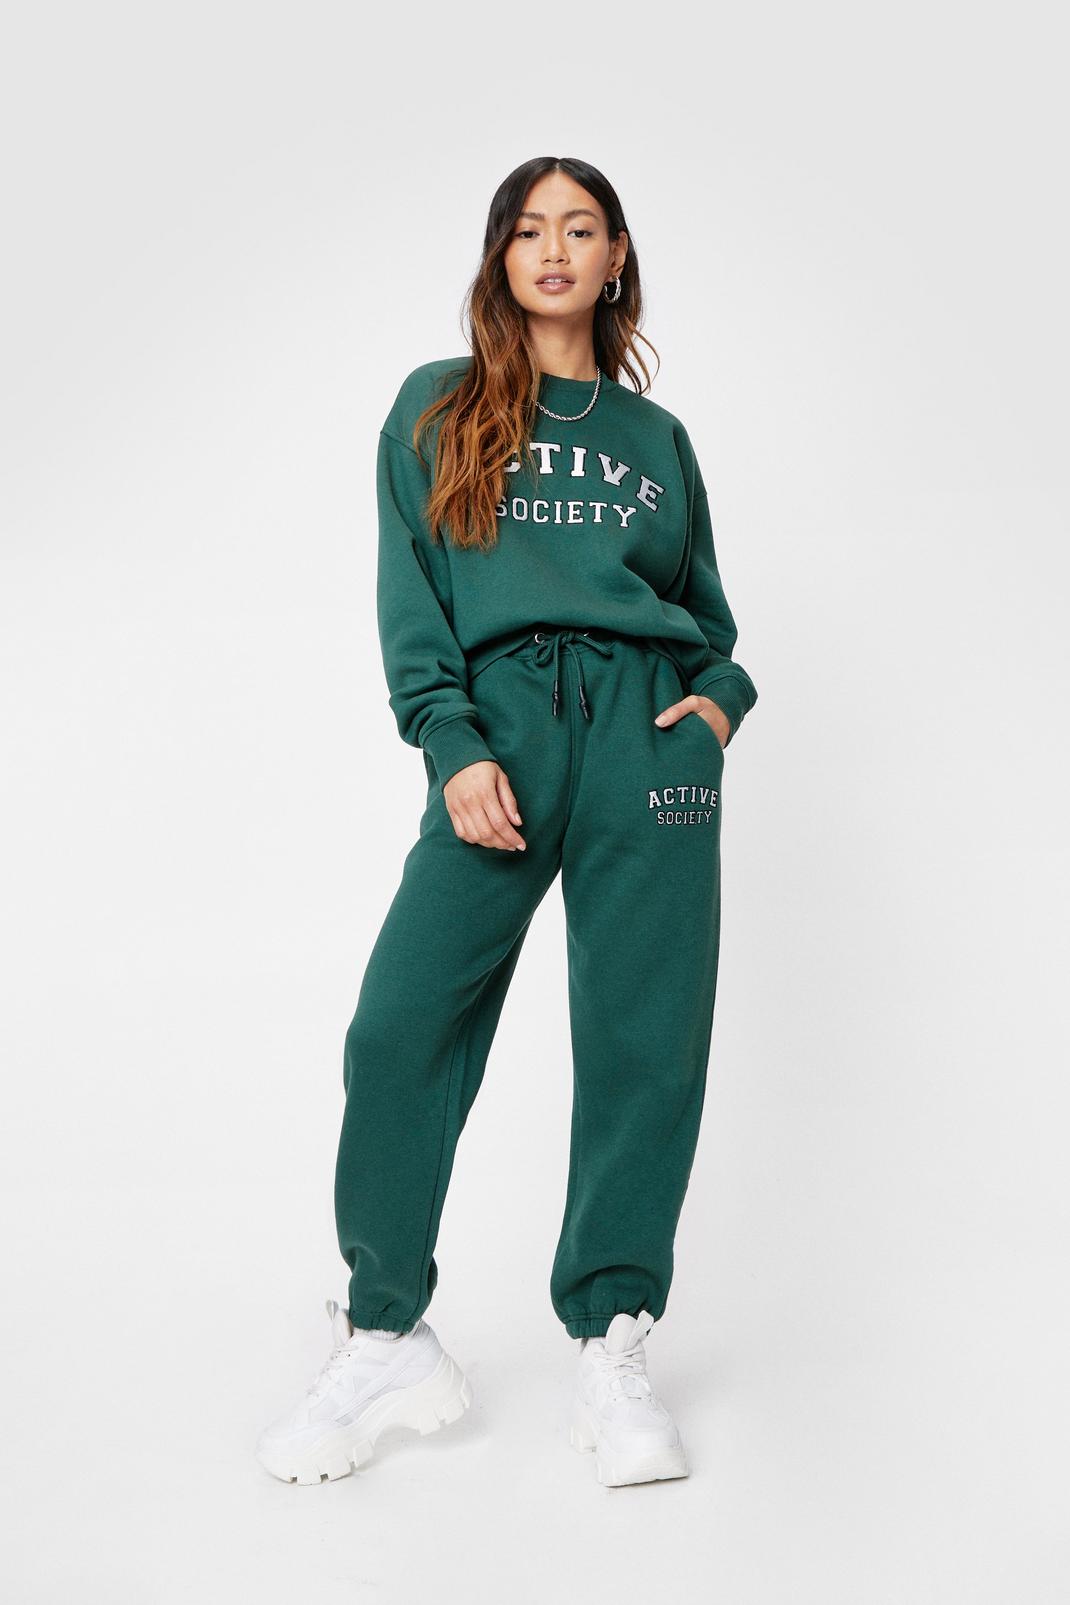 Green Petite Active Society High Waisted Joggers image number 1